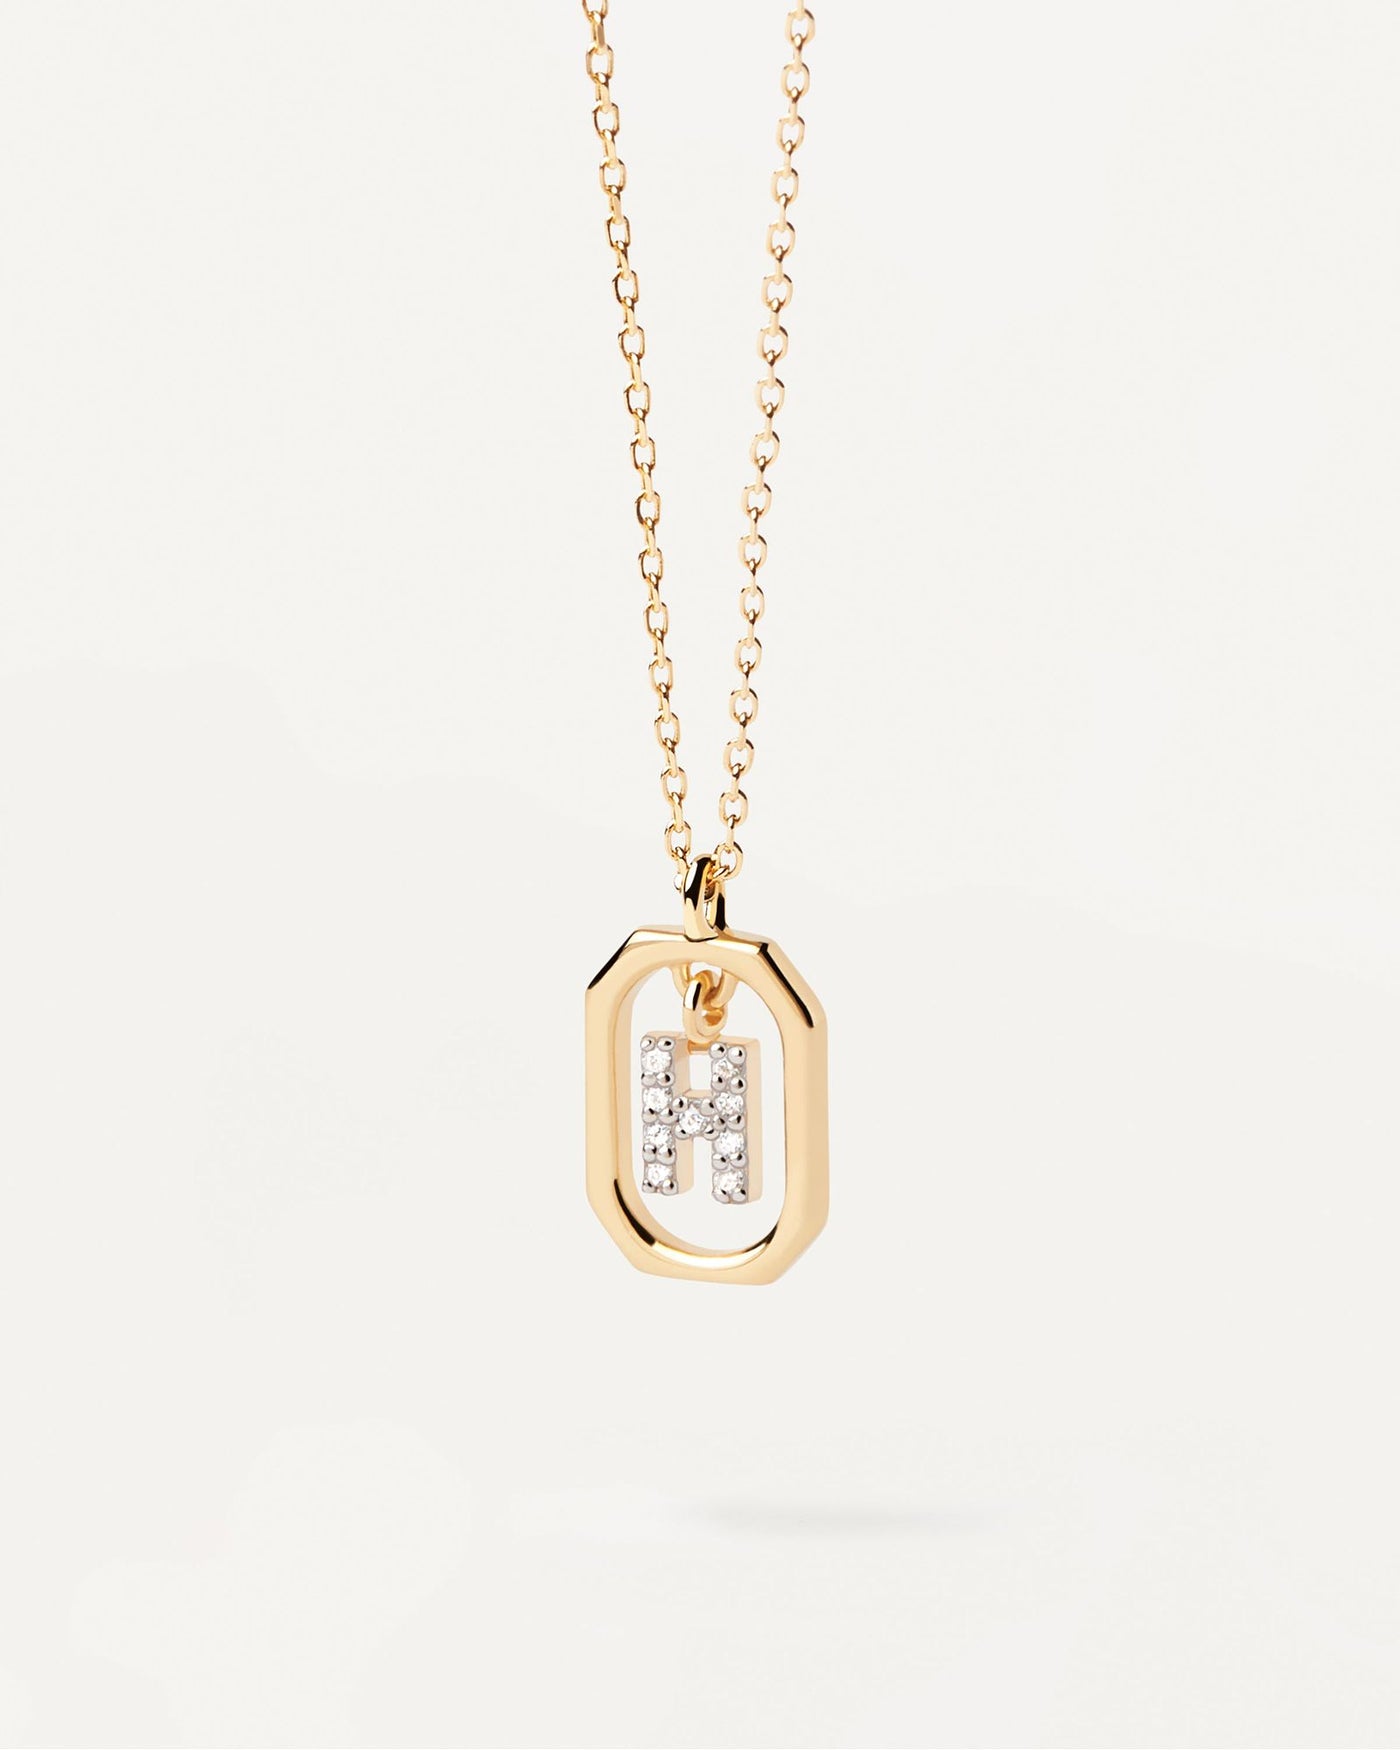 2024 Selection | Mini Letter H Necklace. Small initial H necklace in zirconia inside gold-plated silver octagonal pendant. Get the latest arrival from PDPAOLA. Place your order safely and get this Best Seller. Free Shipping.